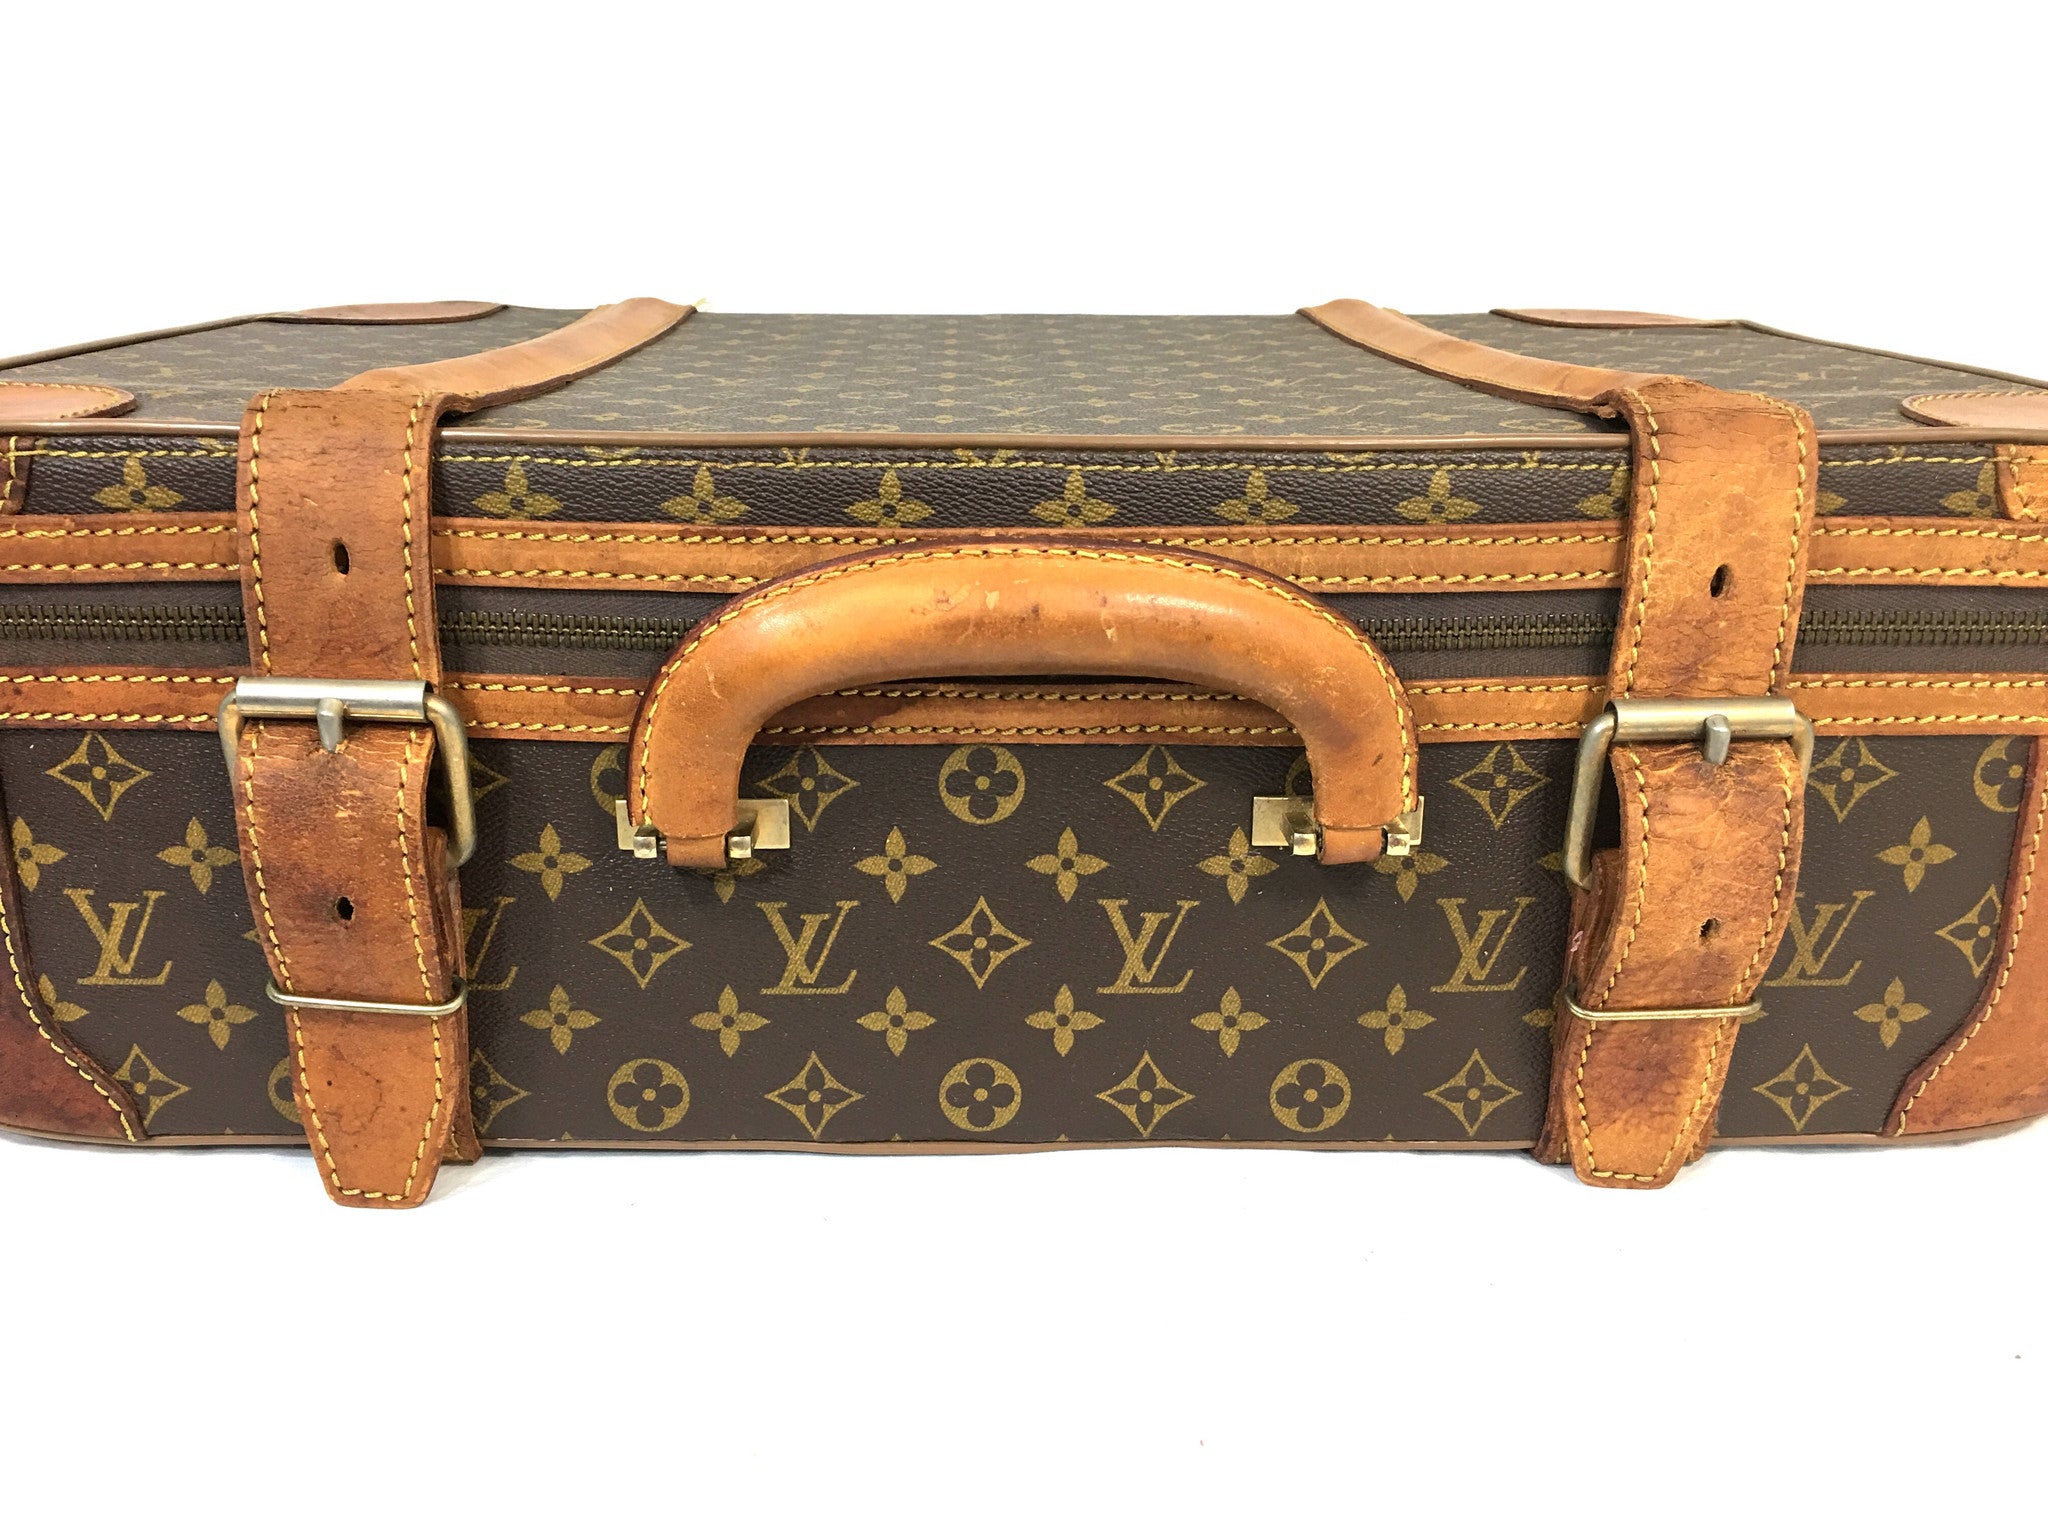 Find many great new & used options and get the best deals for Rare Vintage Louis  Vuitton Custom Clear Acrylic LV Monogram Moët Suitcase Trunk at the be…